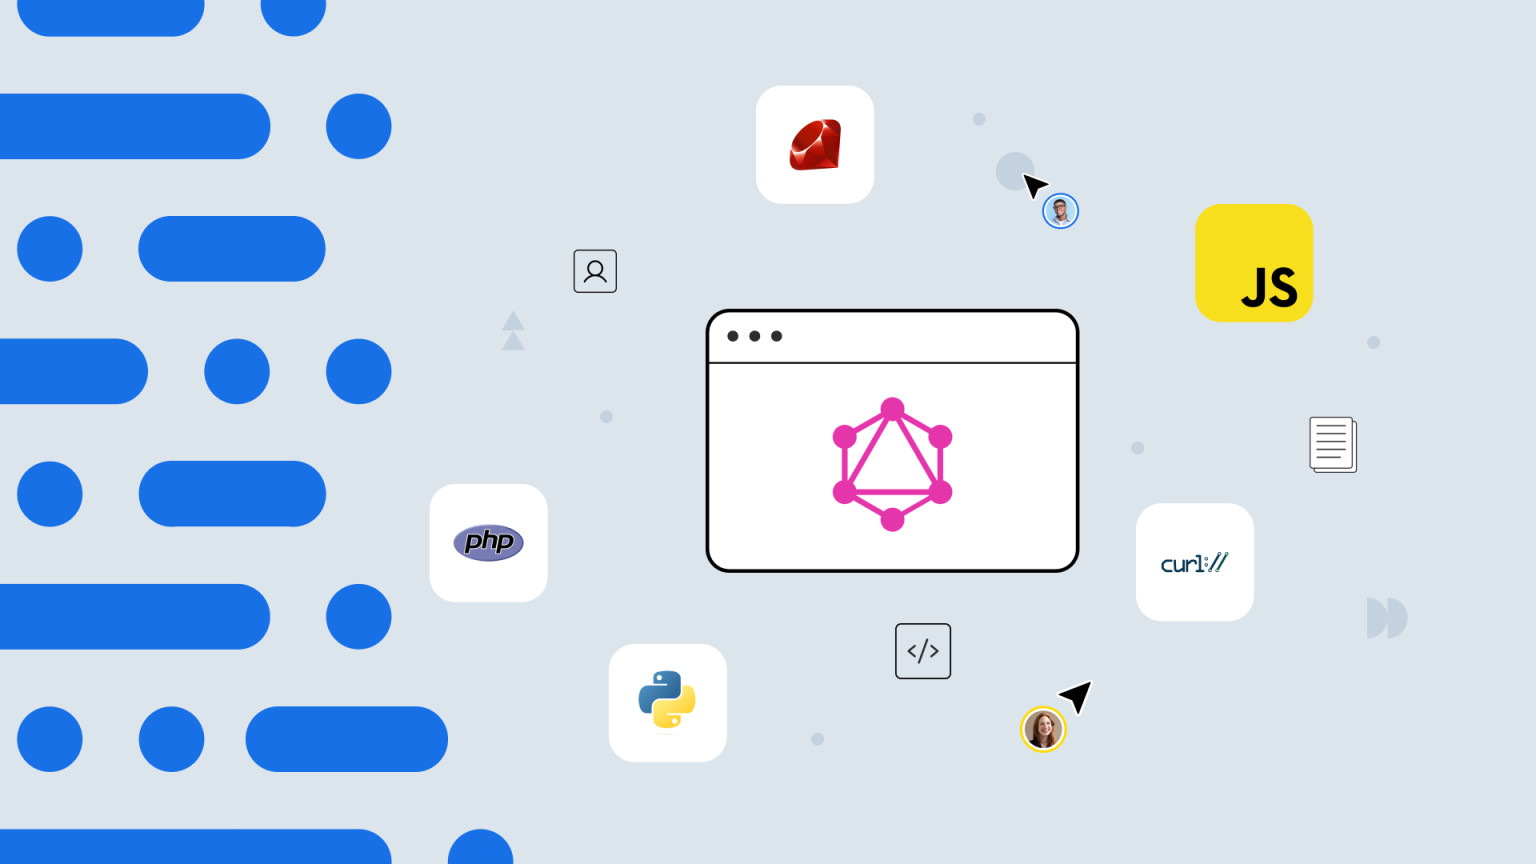 GraphQL is a powerful query language for your APIs. Here's how to make GraphQL HTTP requests in cURL, Python, PHP, JS, Ruby, Java, and Postman — with examples.